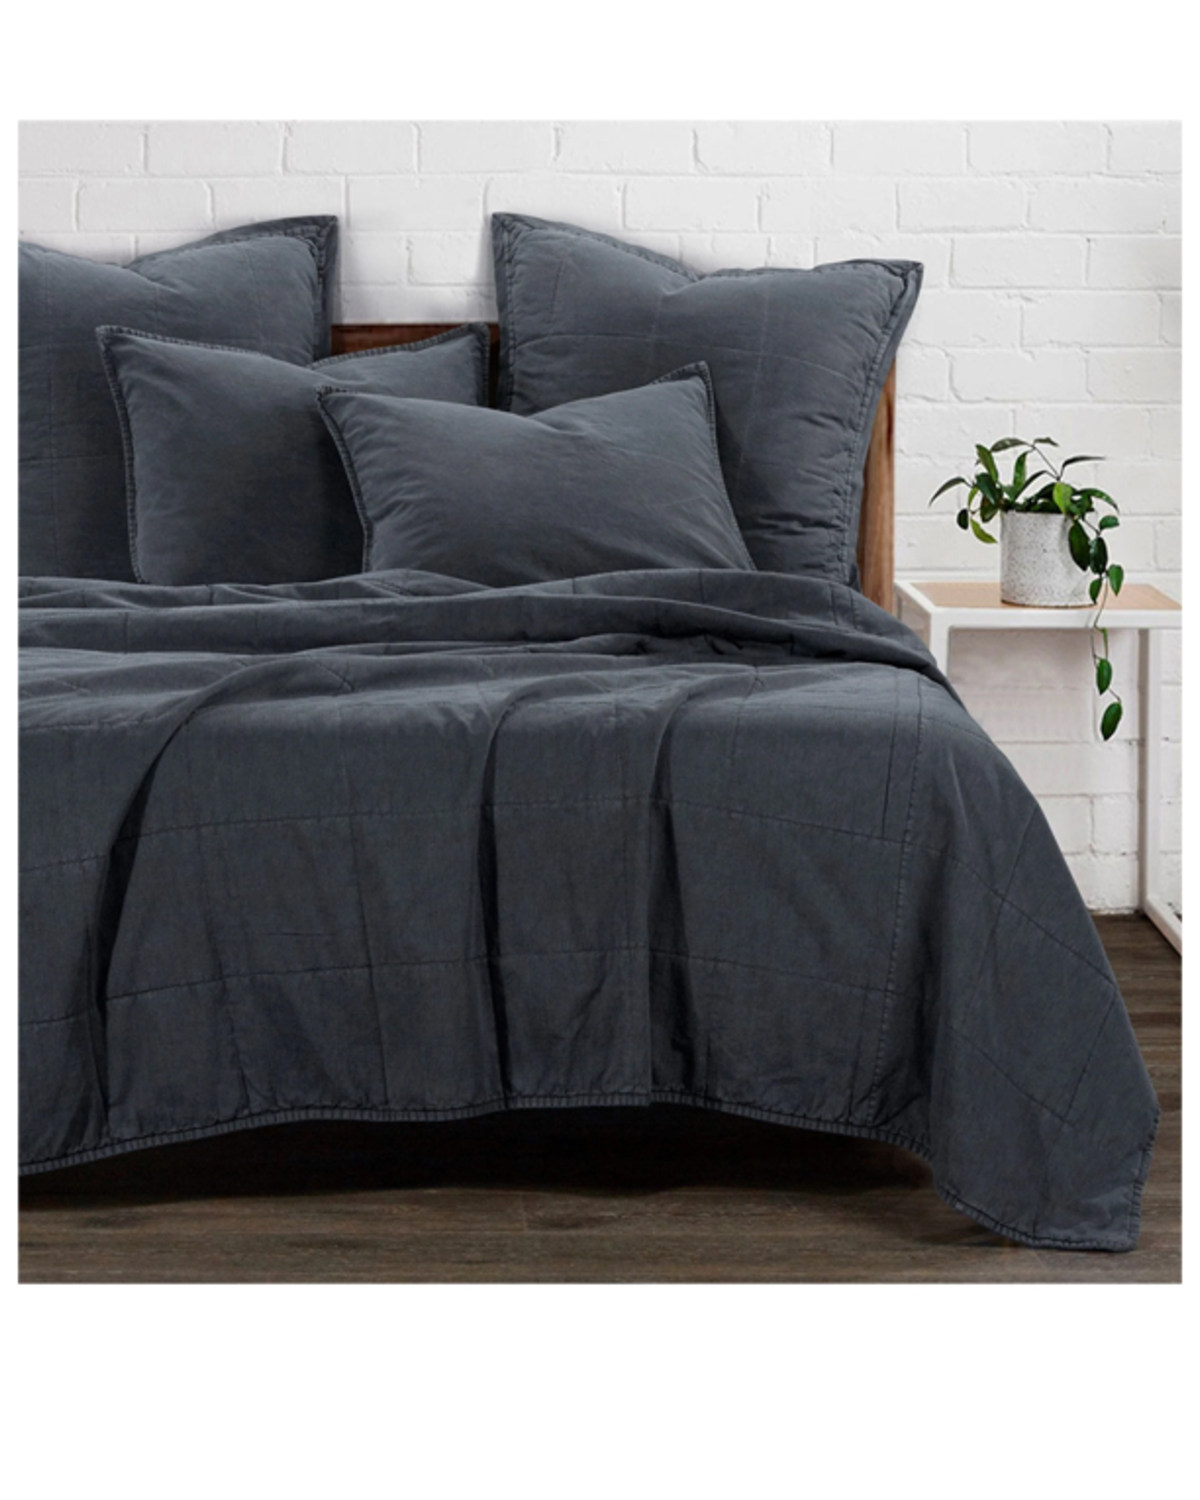 HiEnd Accents Charcoal Stonewashed Cotton Canvas King Coverlet Set